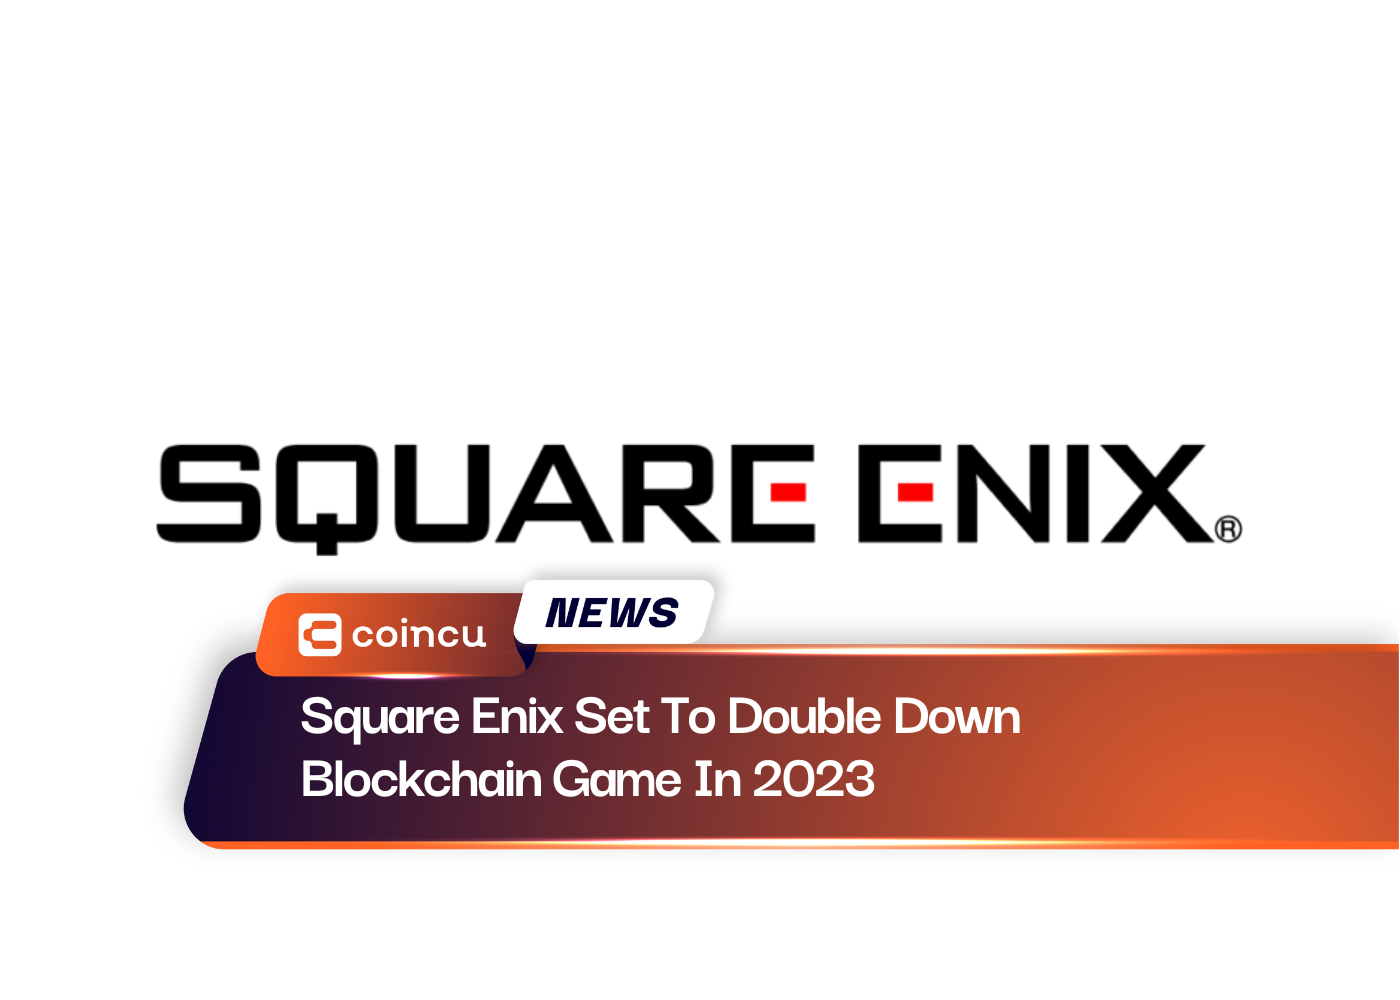 Square Enix Set To Double Down Blockchain Game In 2023